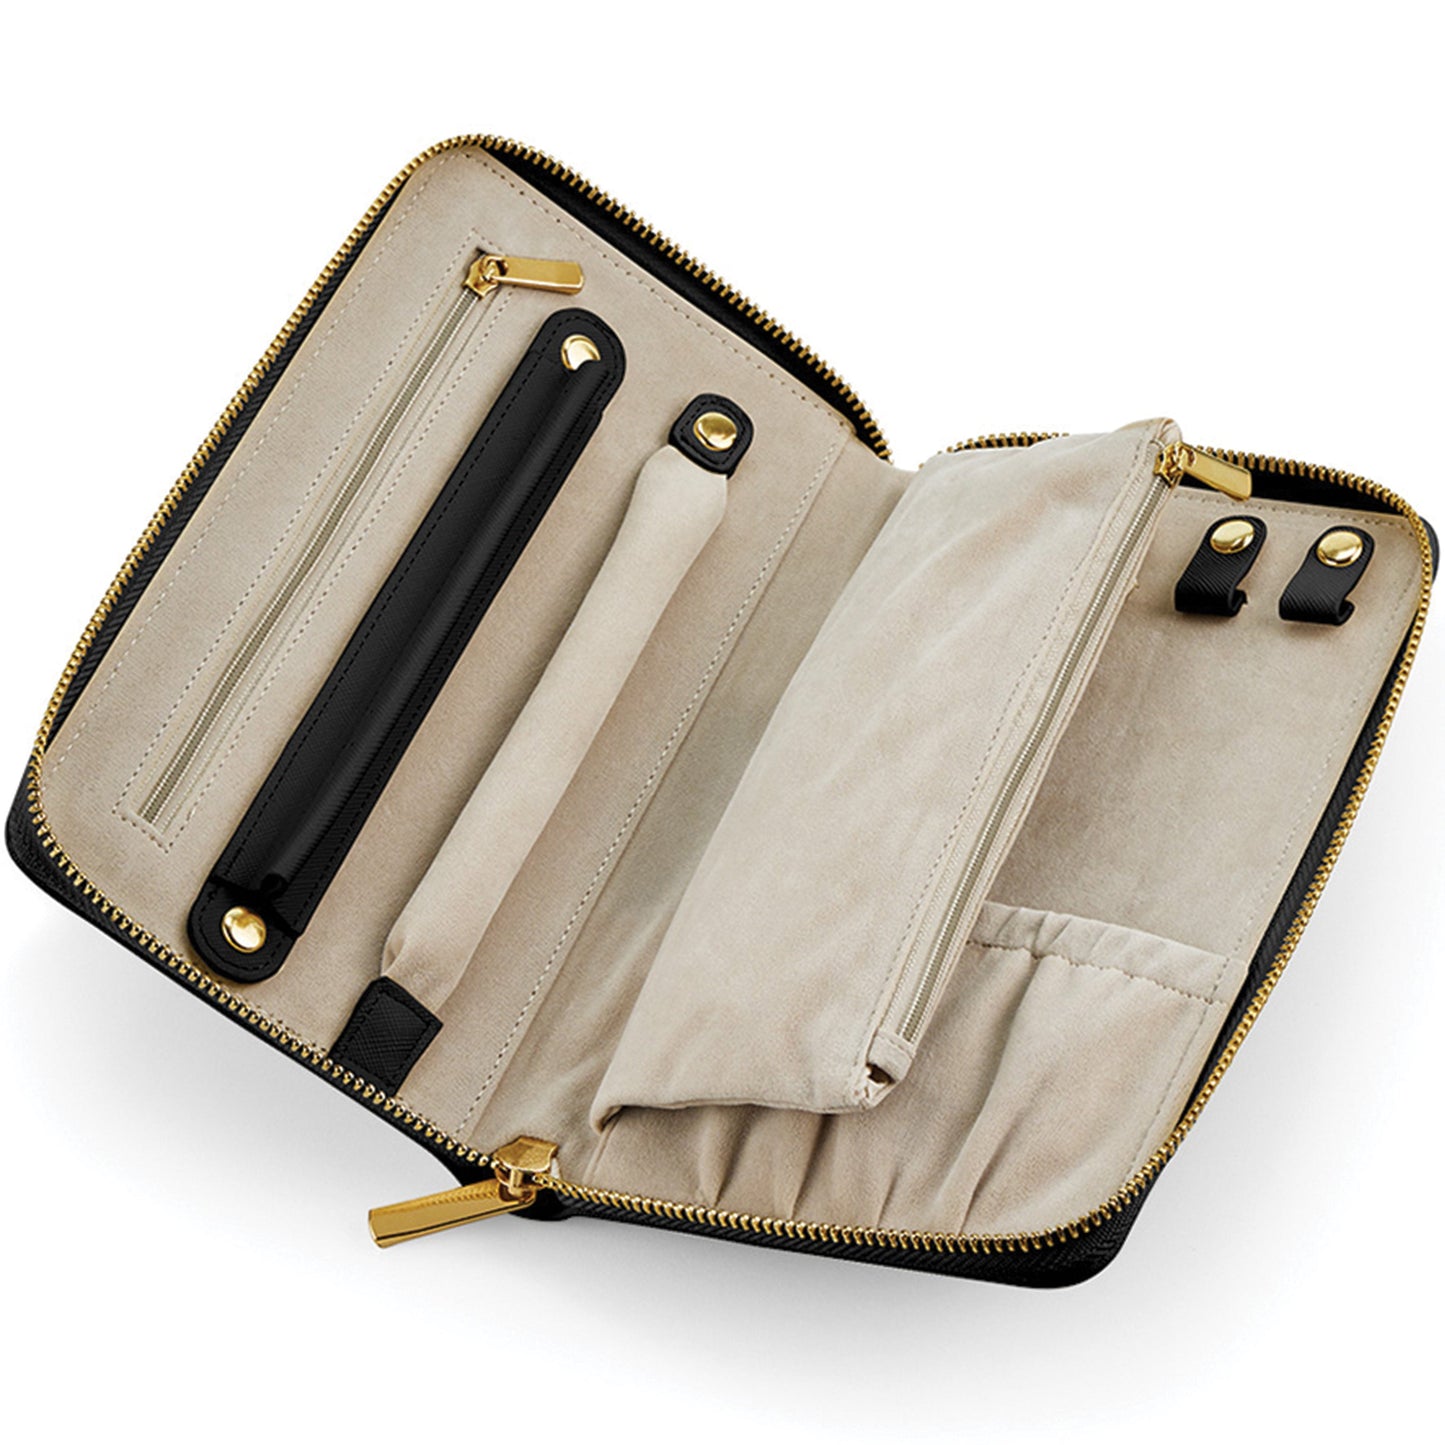 Delicate Initial Boutique Travel Jewellery Case